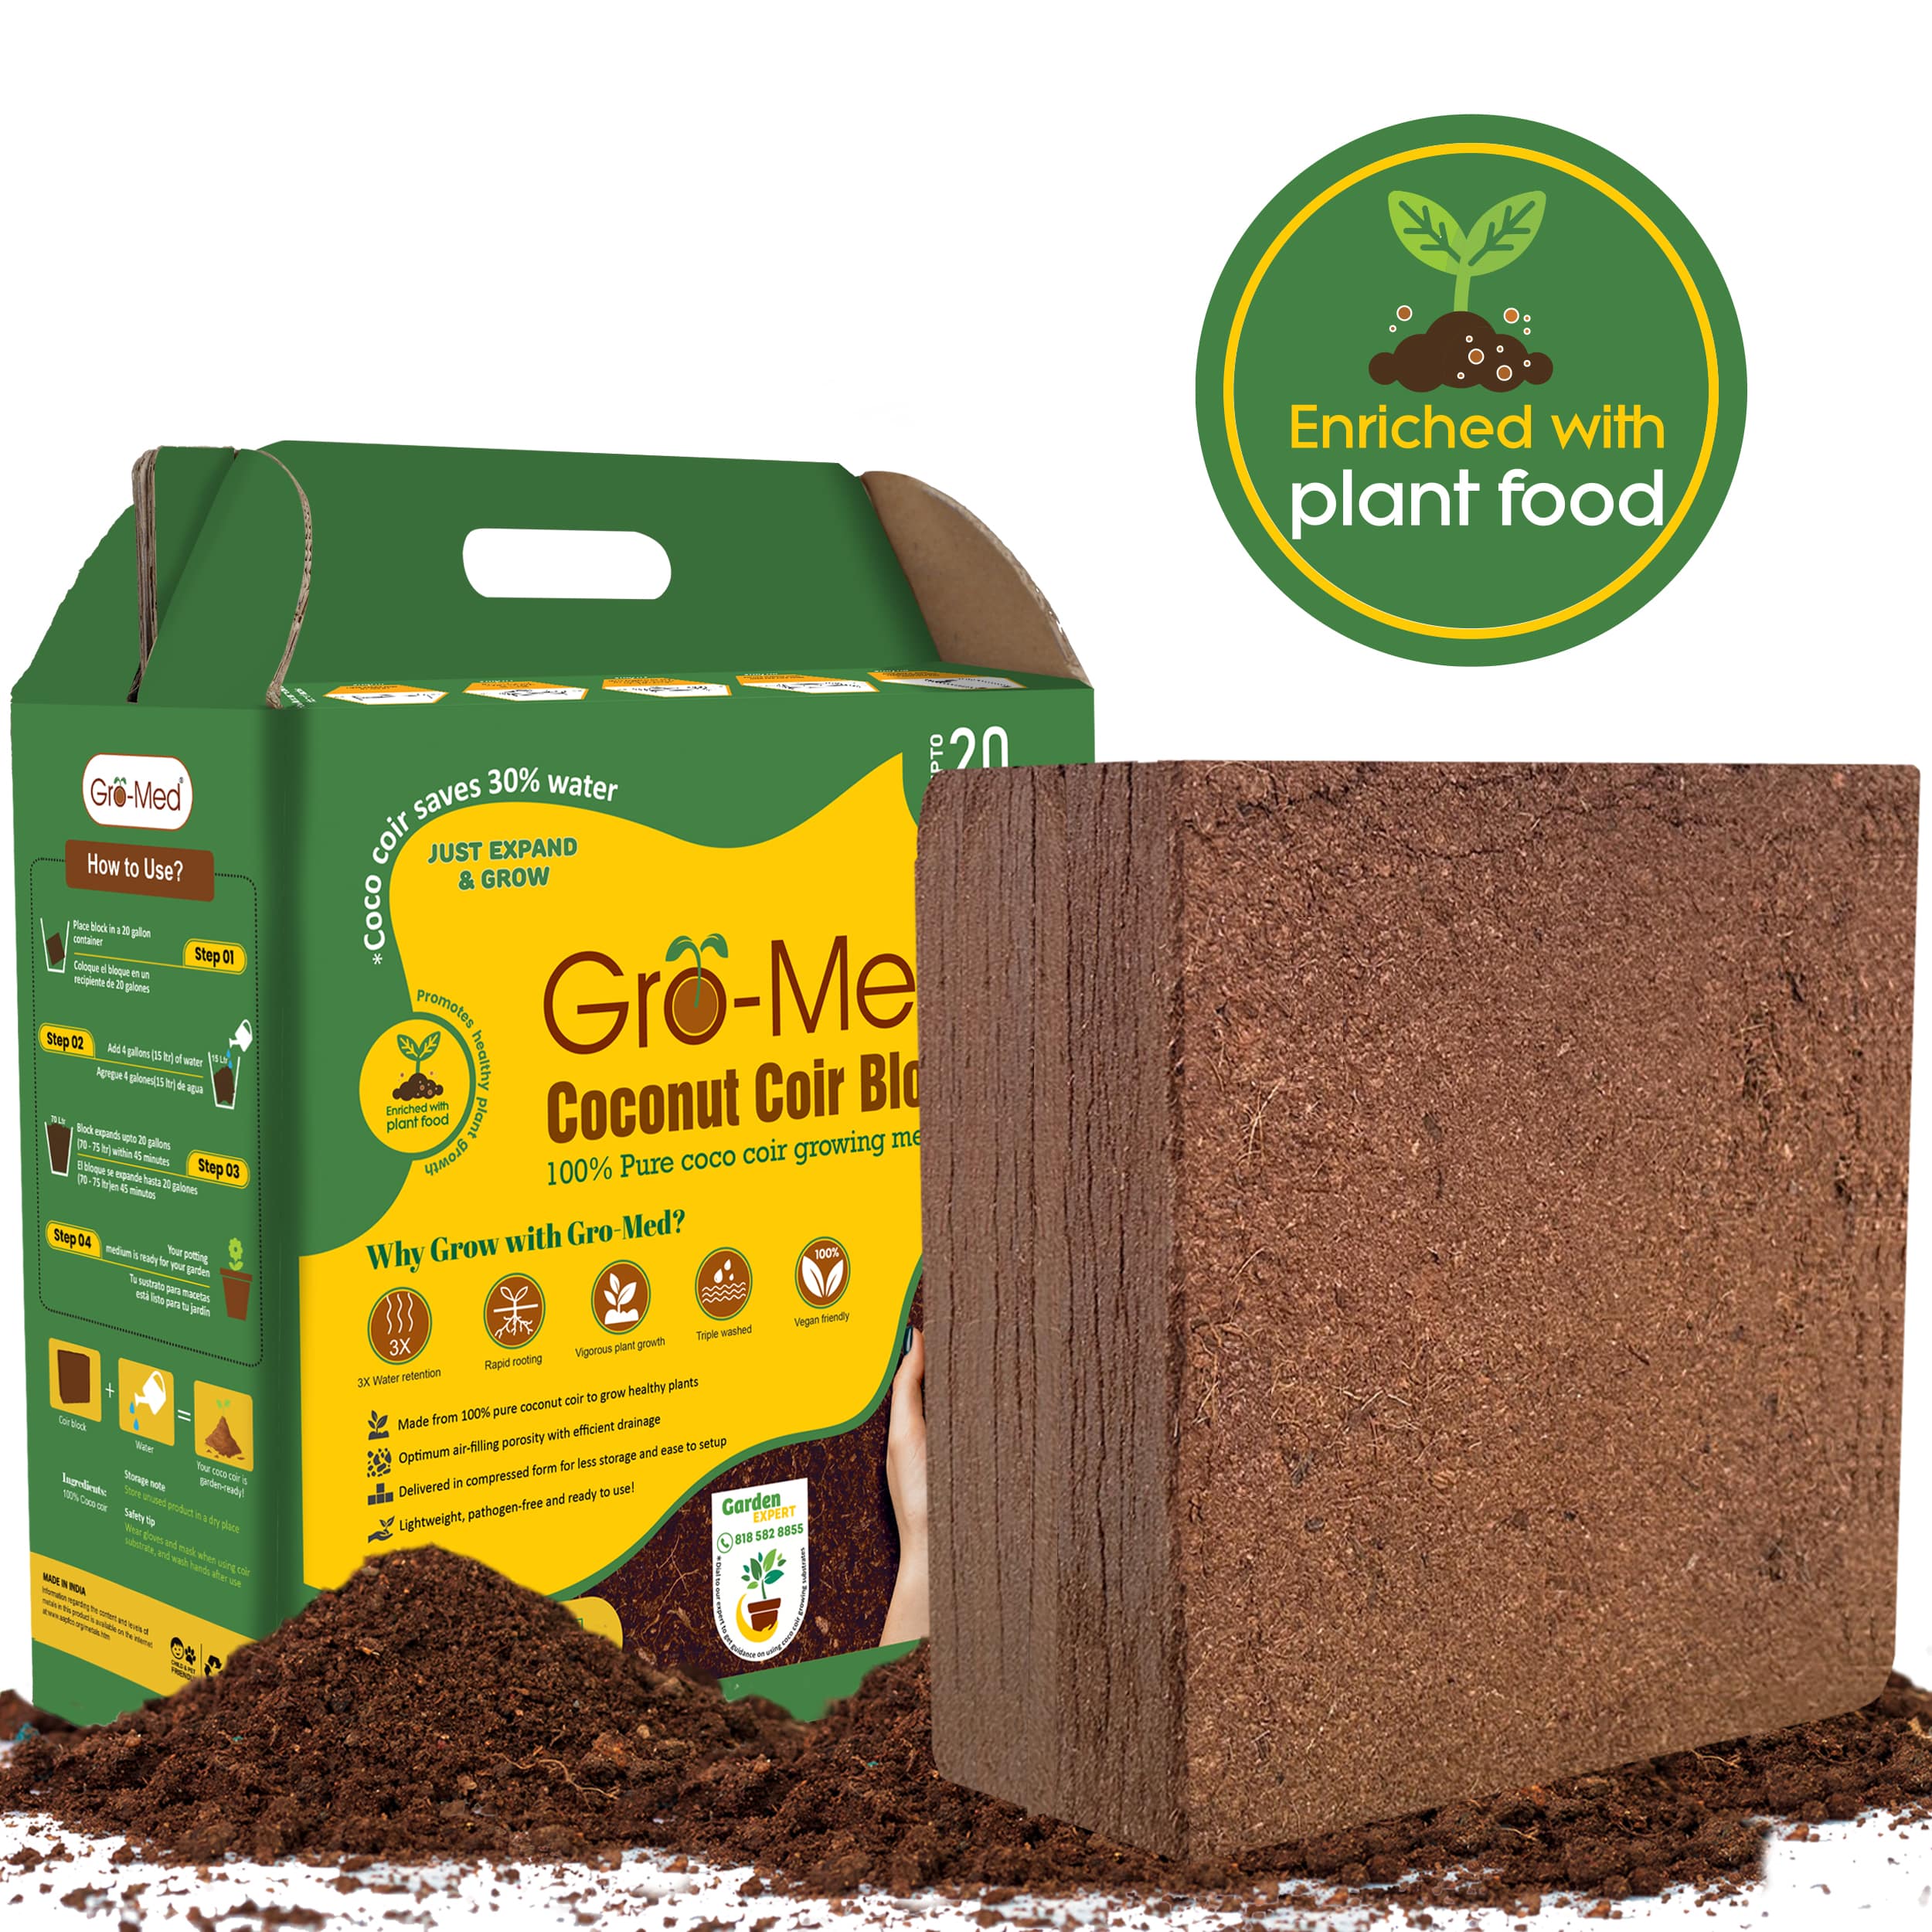 Coconut Coir Block Enriched with plant food 10 lb - Expands Upto 20 Gallons